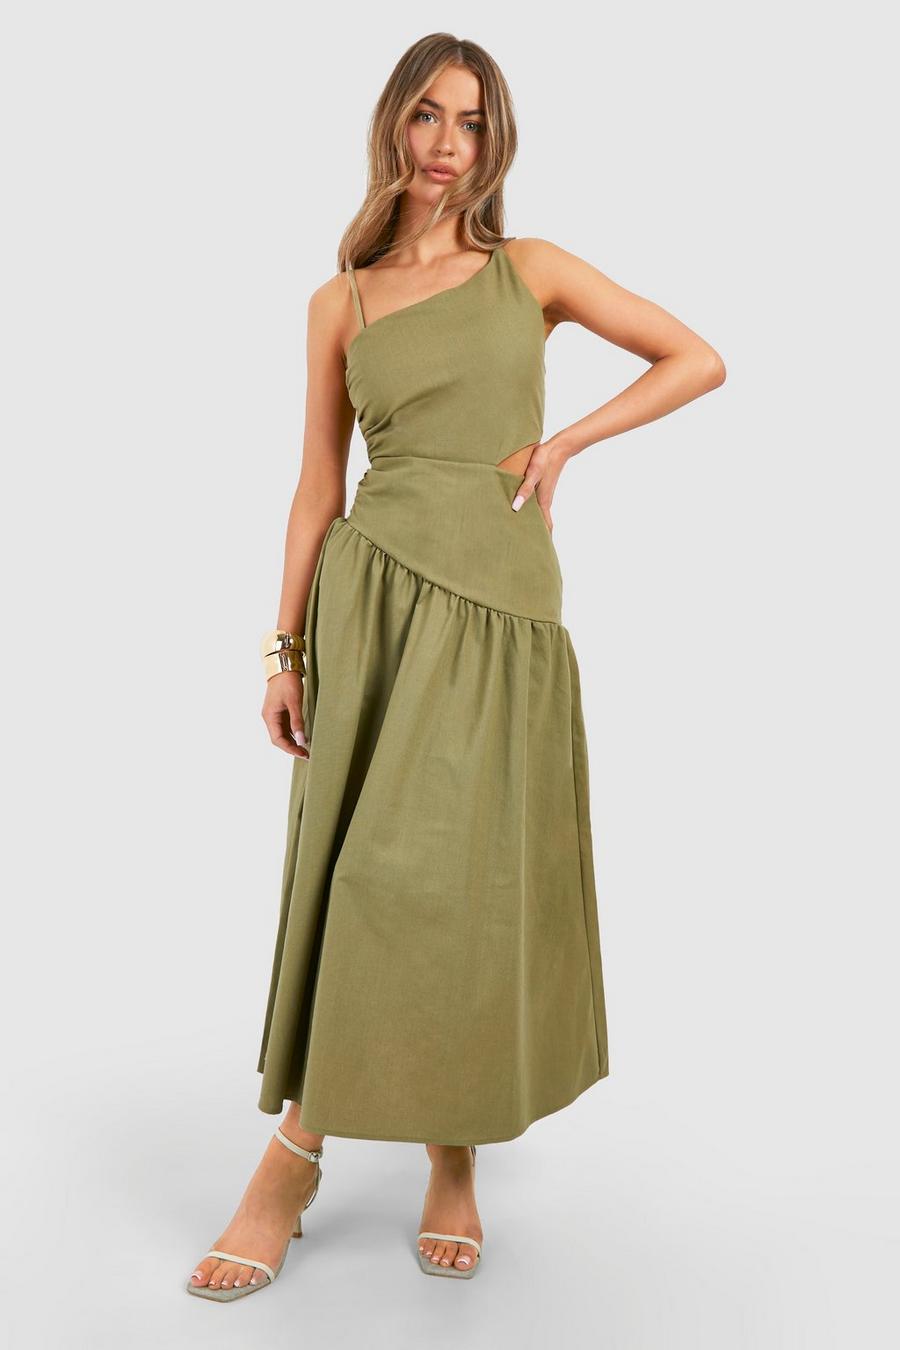 Olive Linen Cut Out Asymmetric Midaxi Dress image number 1